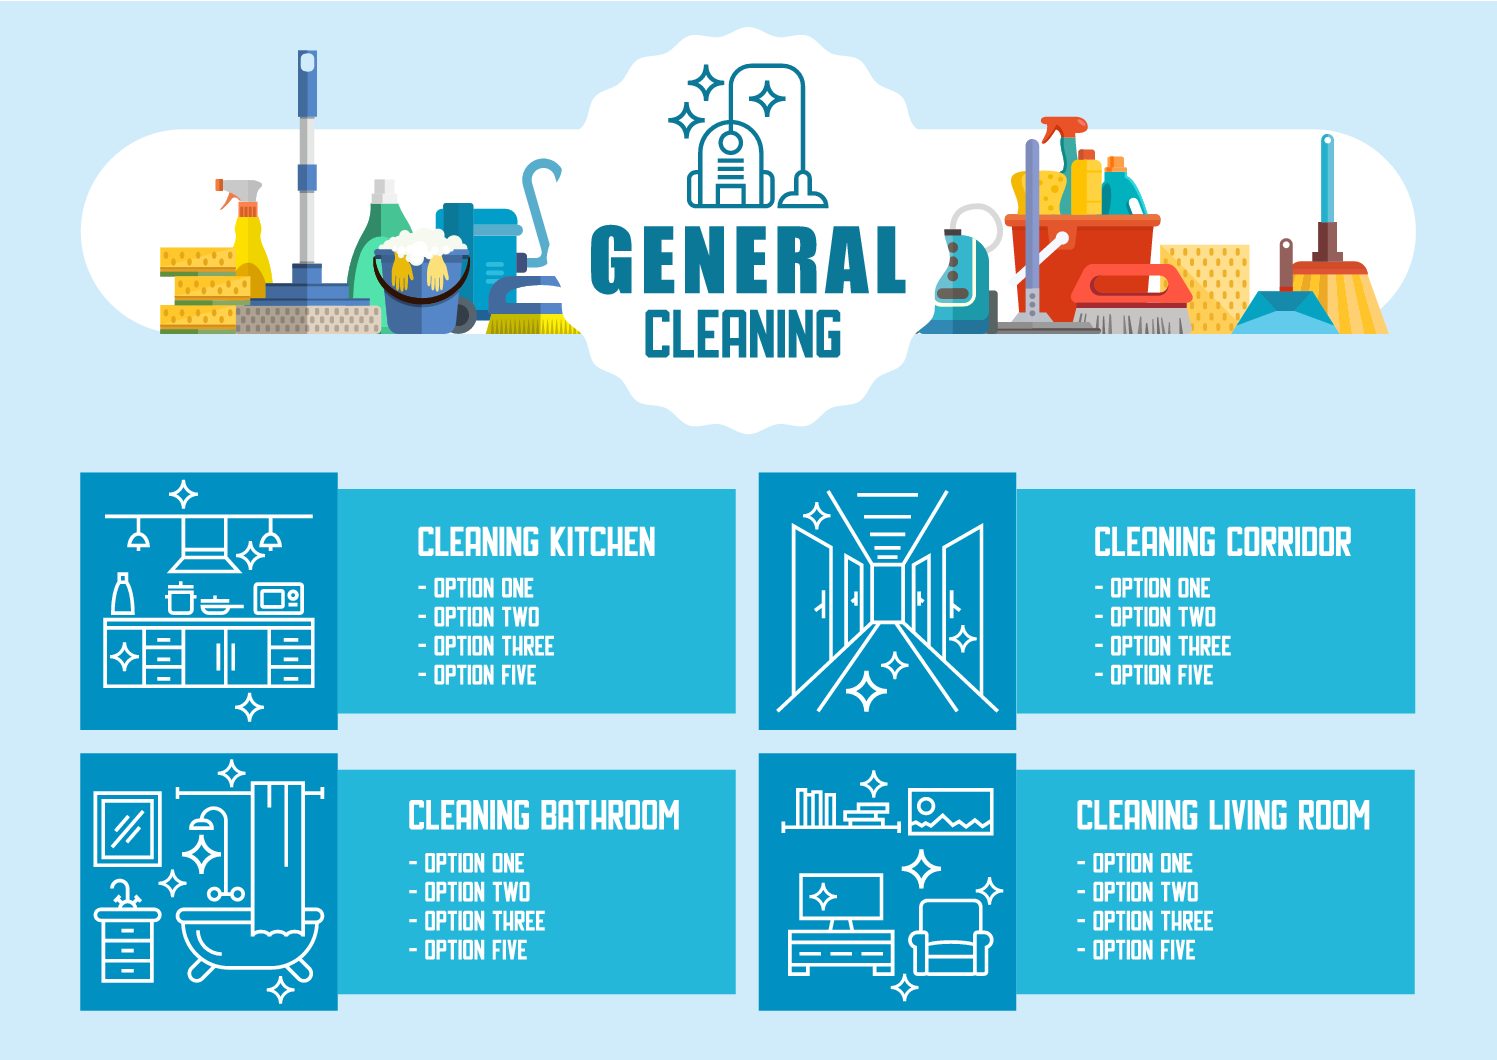 HOW TO GUIDE ON WRITING AN ESTIMATE FOR A CLEANING JOB